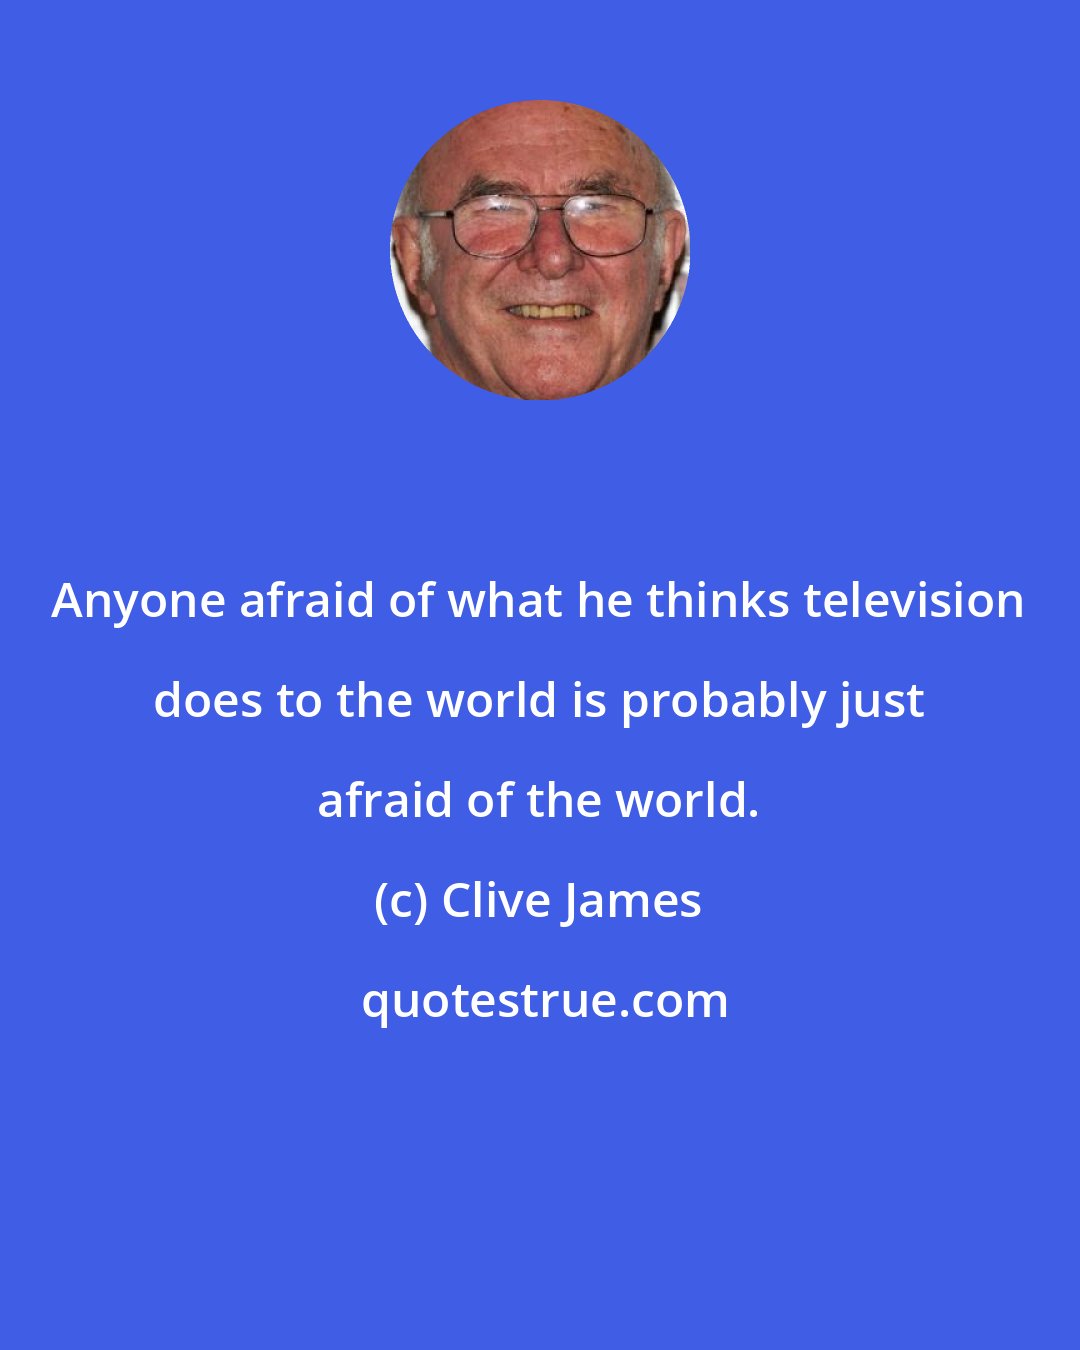 Clive James: Anyone afraid of what he thinks television does to the world is probably just afraid of the world.